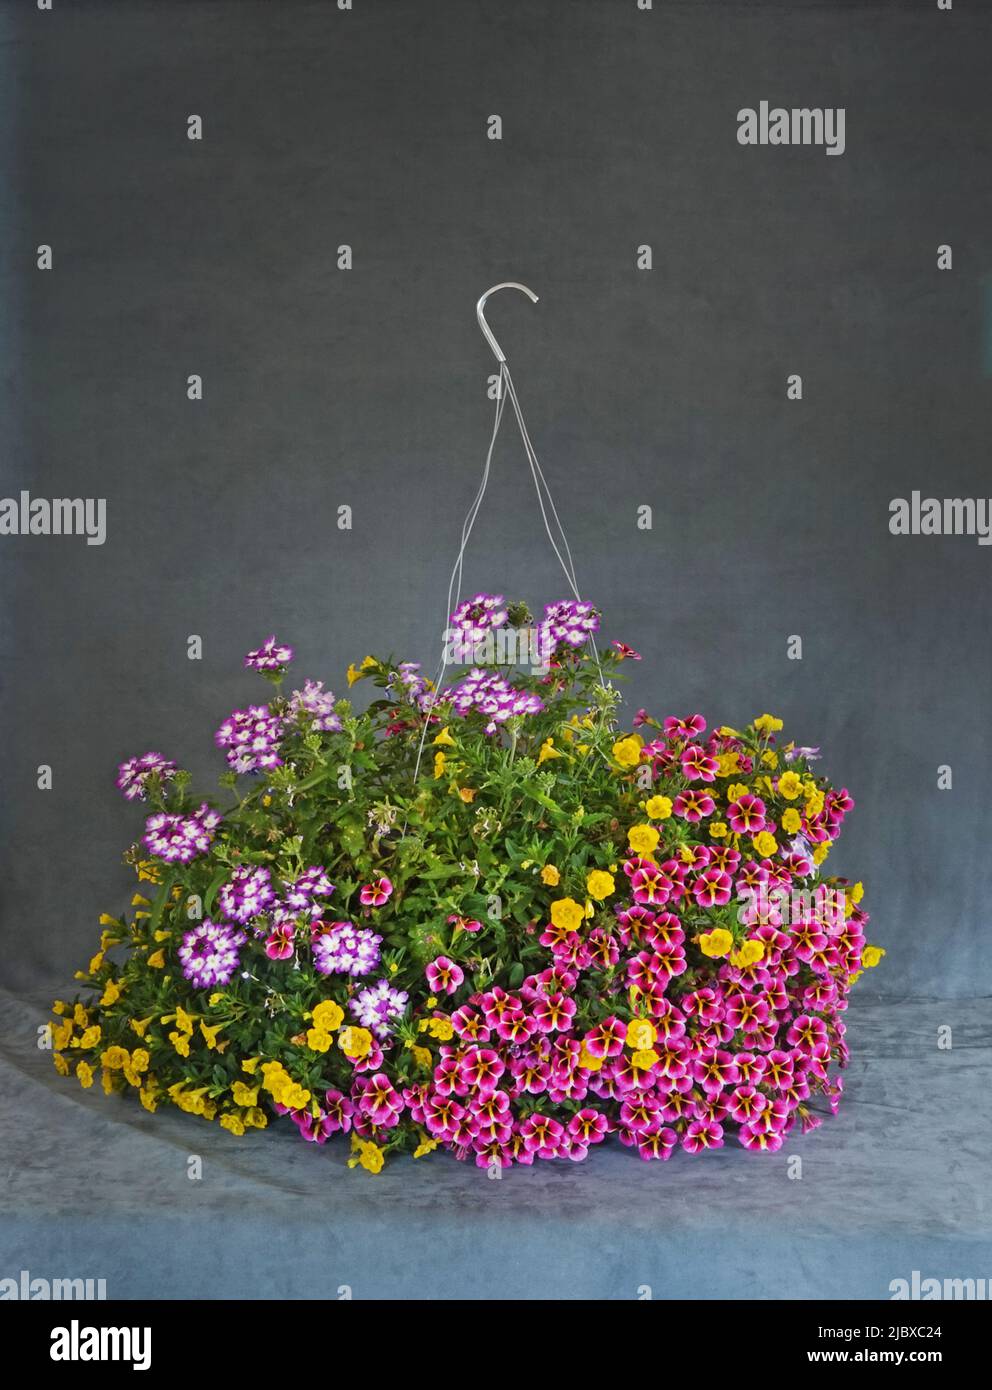 A basket of spring flowers called Calibrachoa, also called superbells and million bells. Stock Photo